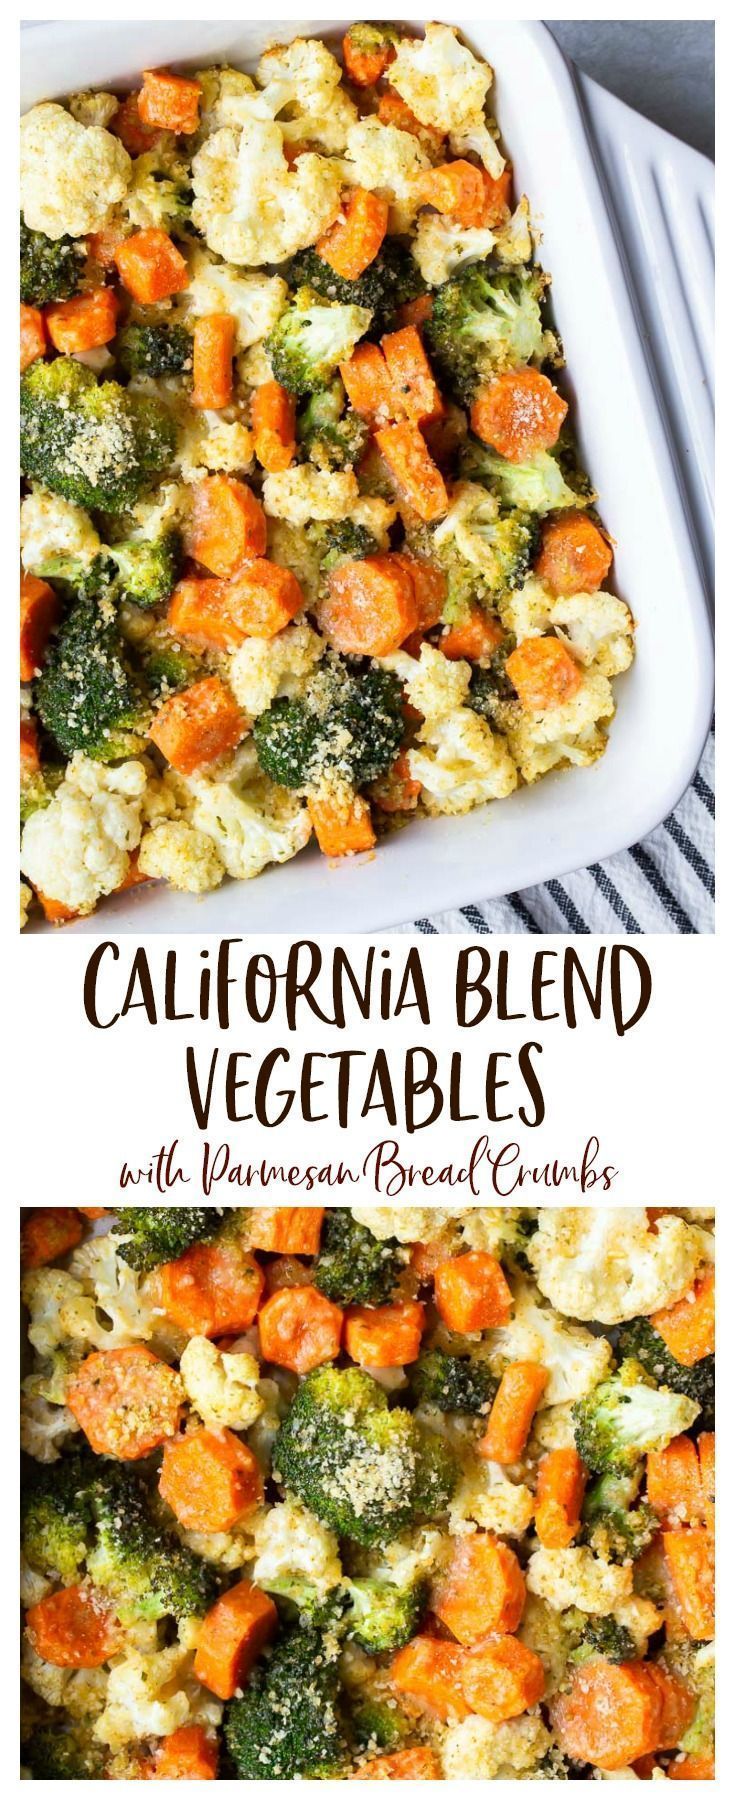 California Blend Vegetables with Parmesan Bread Crumbs -   19 vegetable sides for thanksgiving dinner ideas